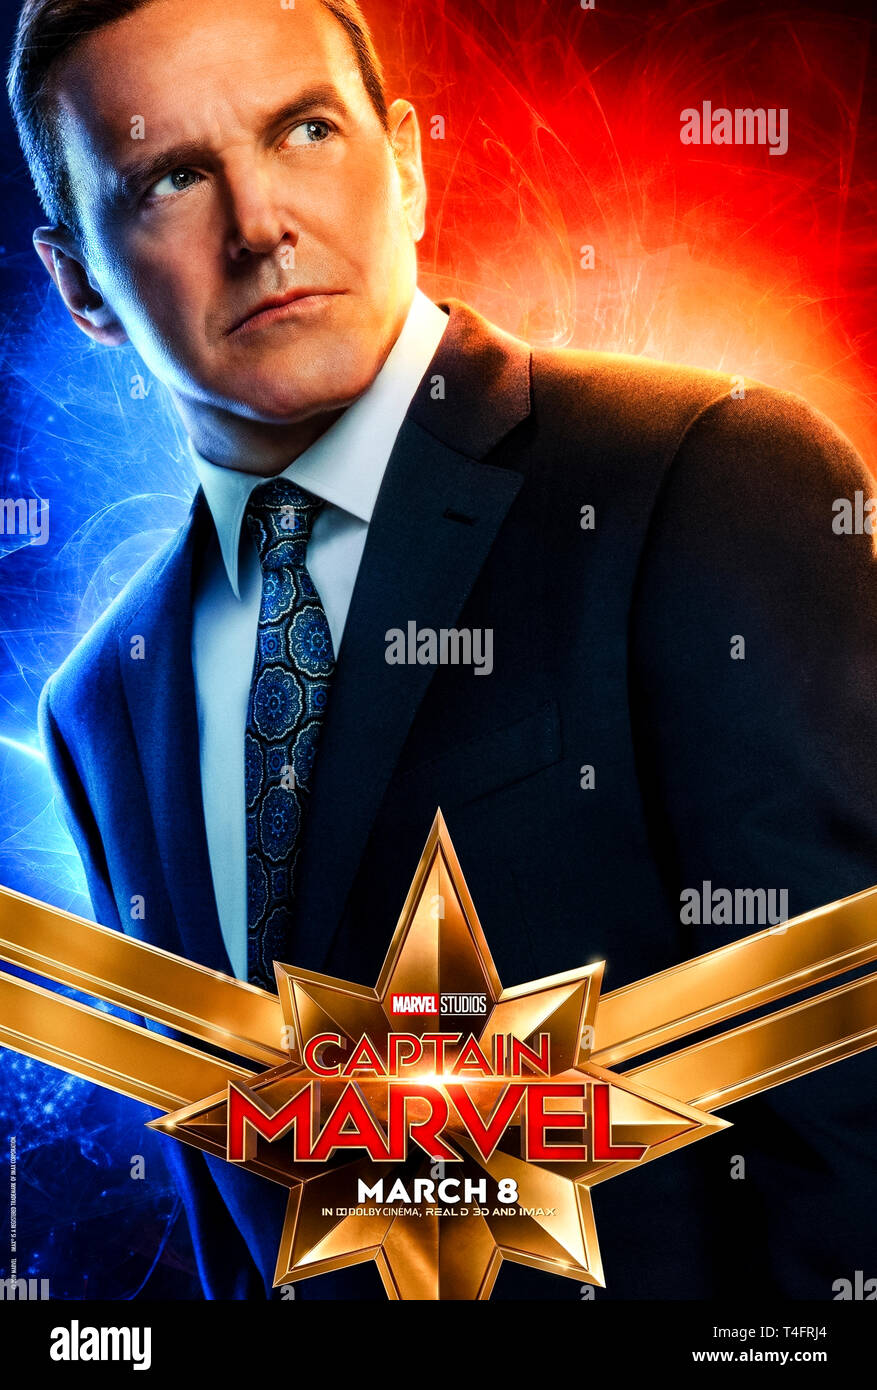 Captain Marvel (2019) directed by Anna Boden and Ryan Fleck and starring Brie Larson, Samuel L. Jackson and Clark Gregg as Agent Coulson. USAF pilot Carol Danvers becomes one of the most powerful superheros in the universe. Stock Photo